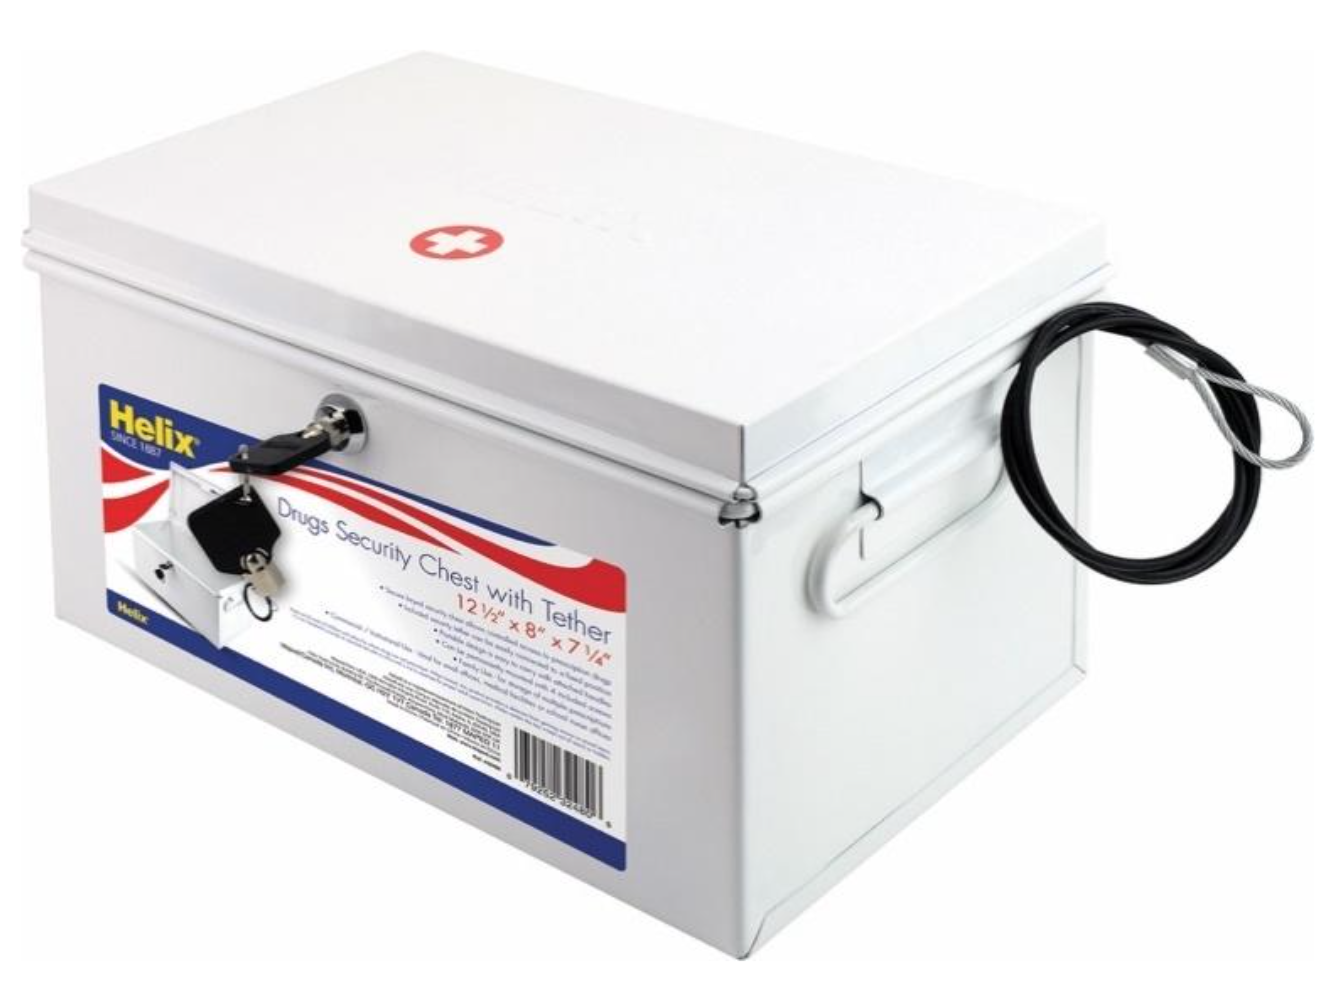 Recalled Helix Metal Lockable Drug Security Chest - closed